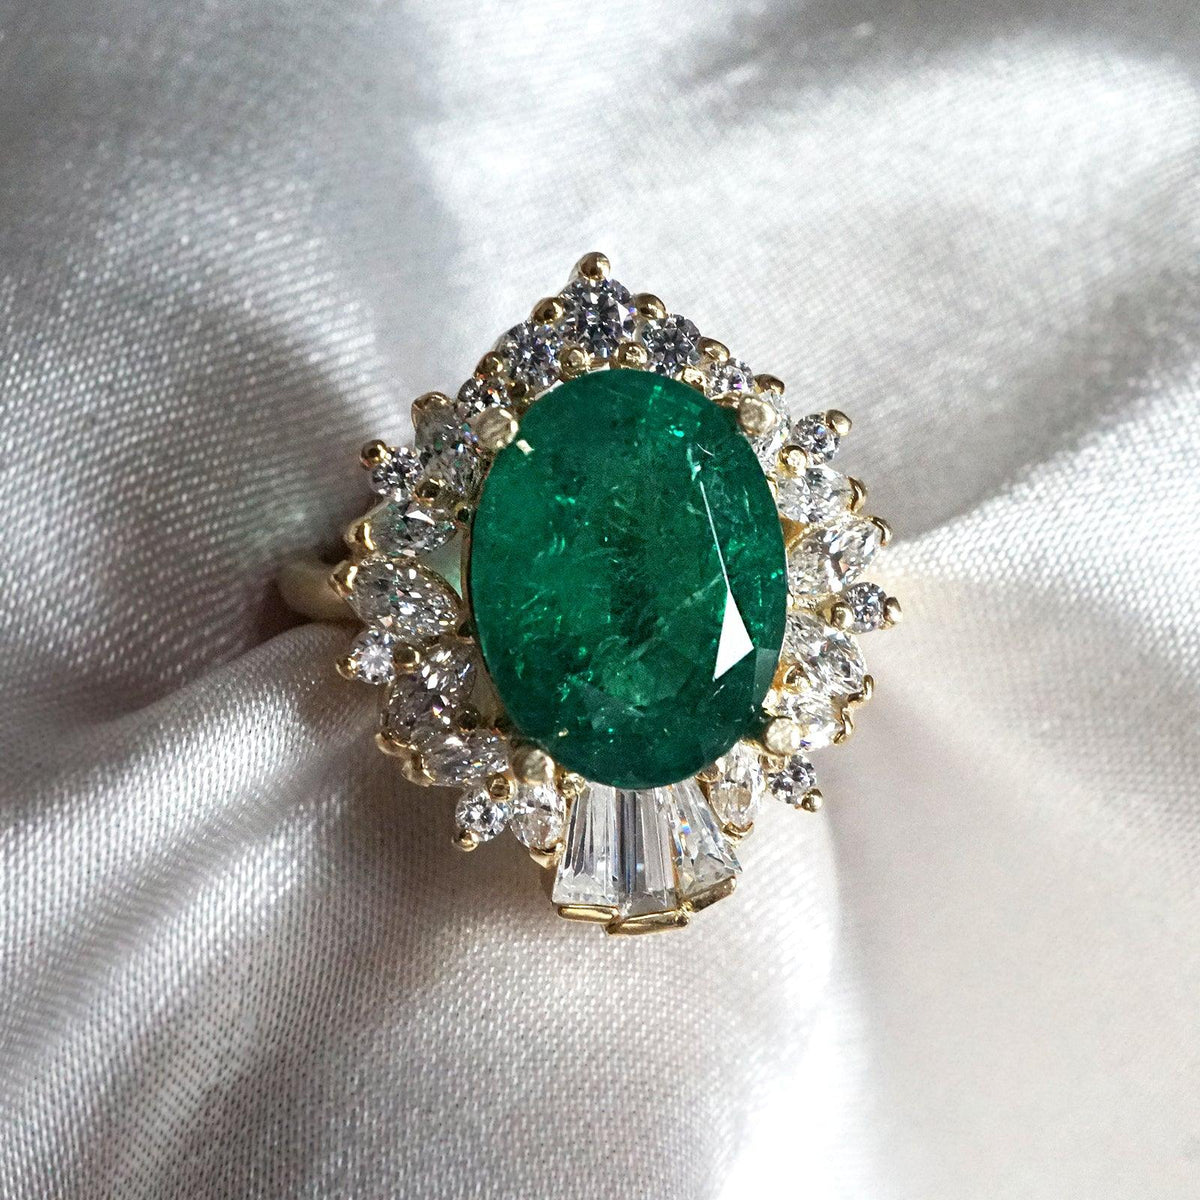 Hall Of Mirrors Oval Emerald Diamond Ring in 14K and 18K Gold, 3.9ct